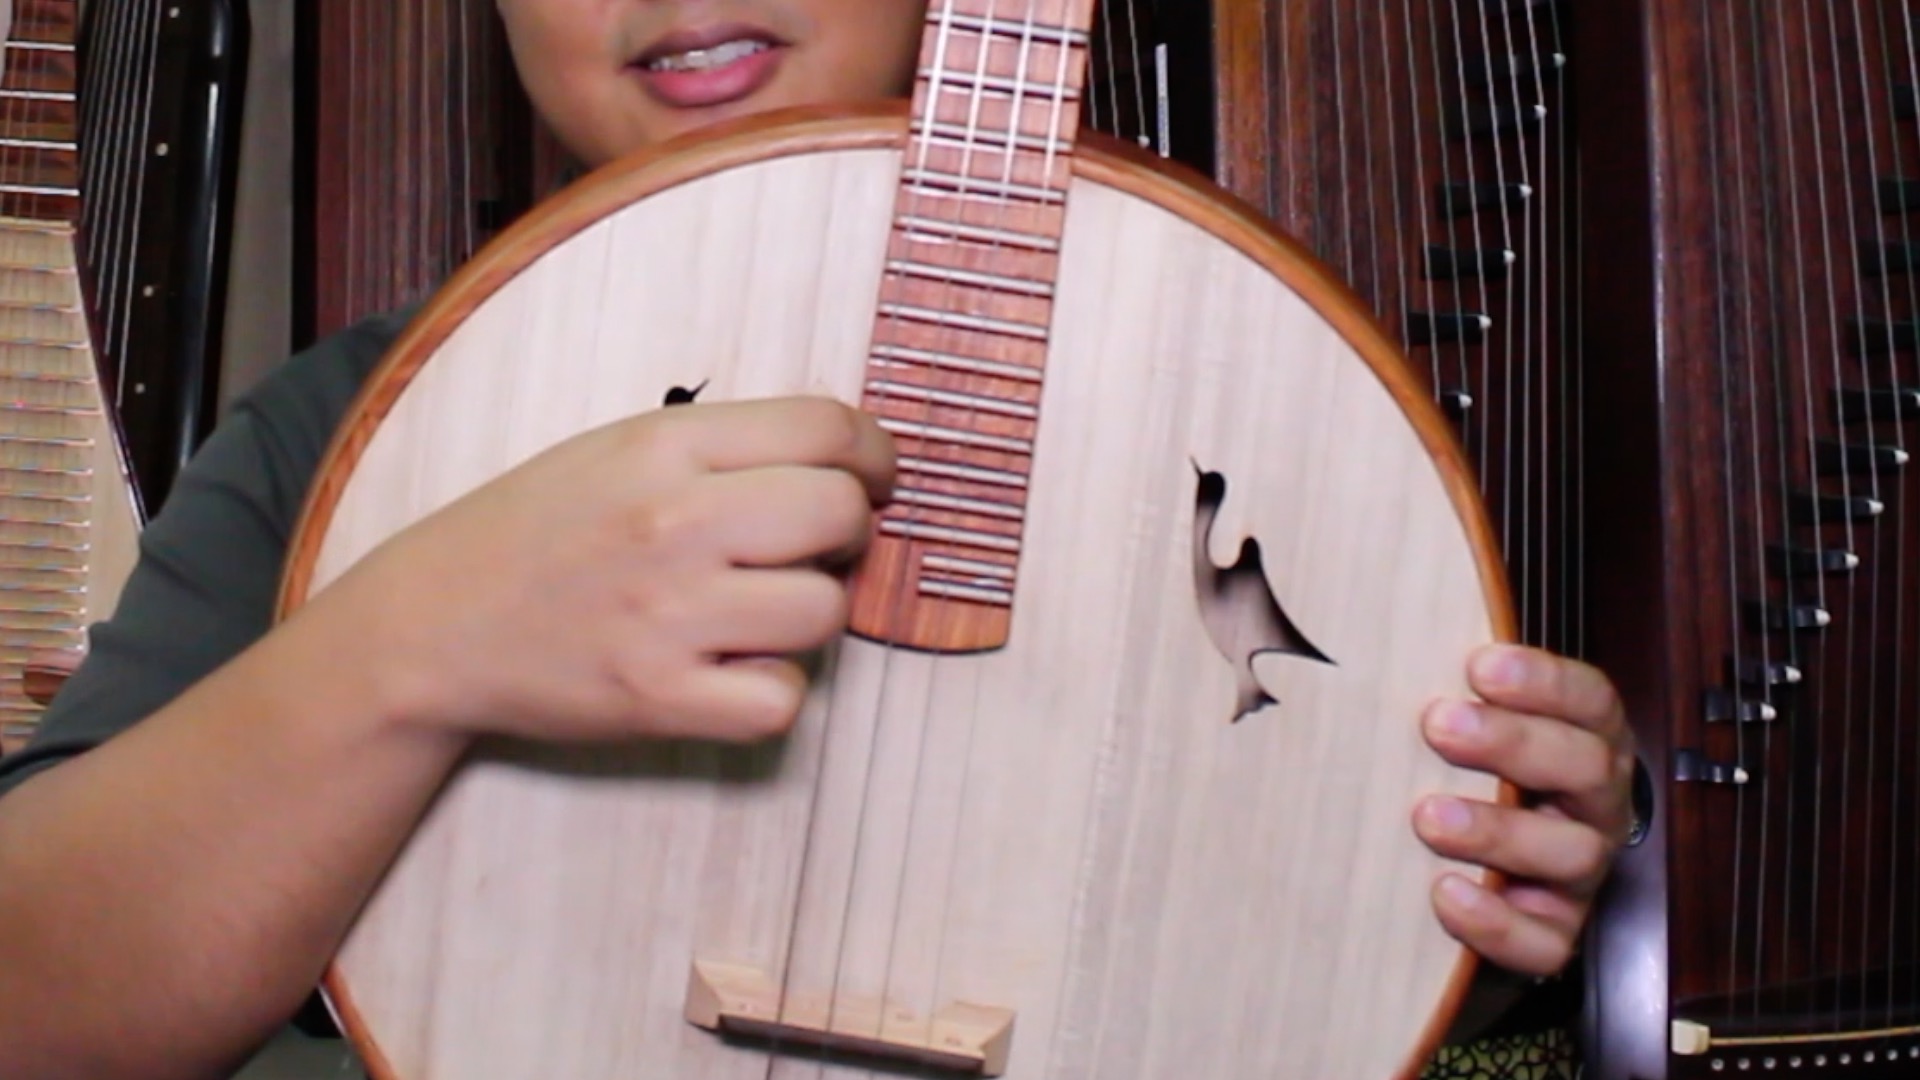 1. Strings placement